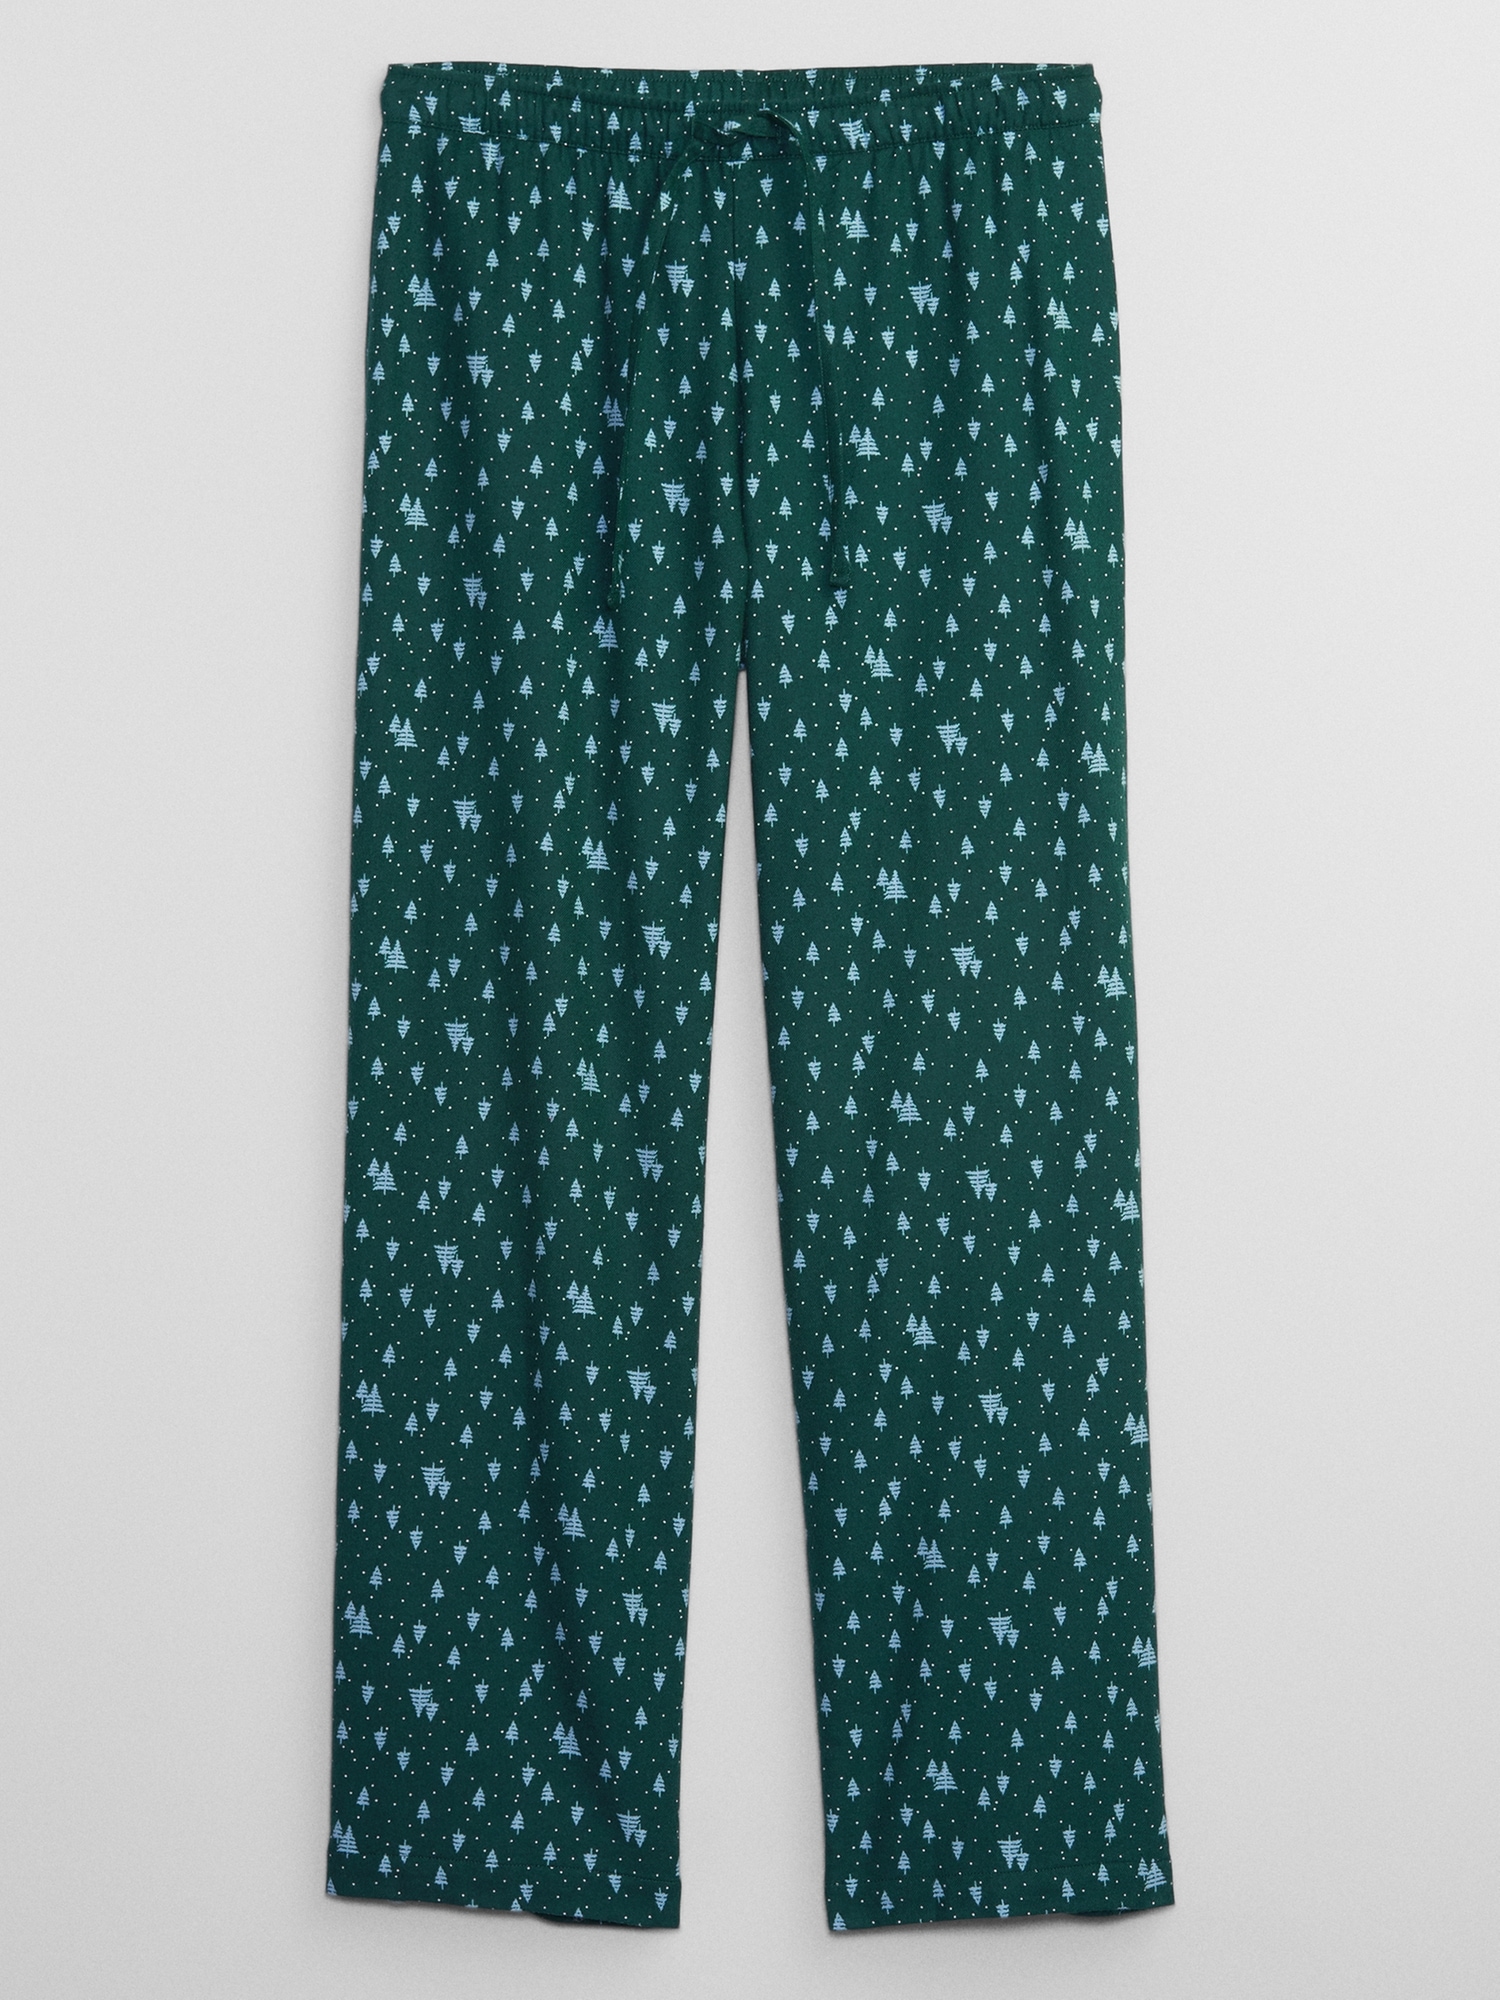 Women's Green and White Flannel Pajama Bottoms